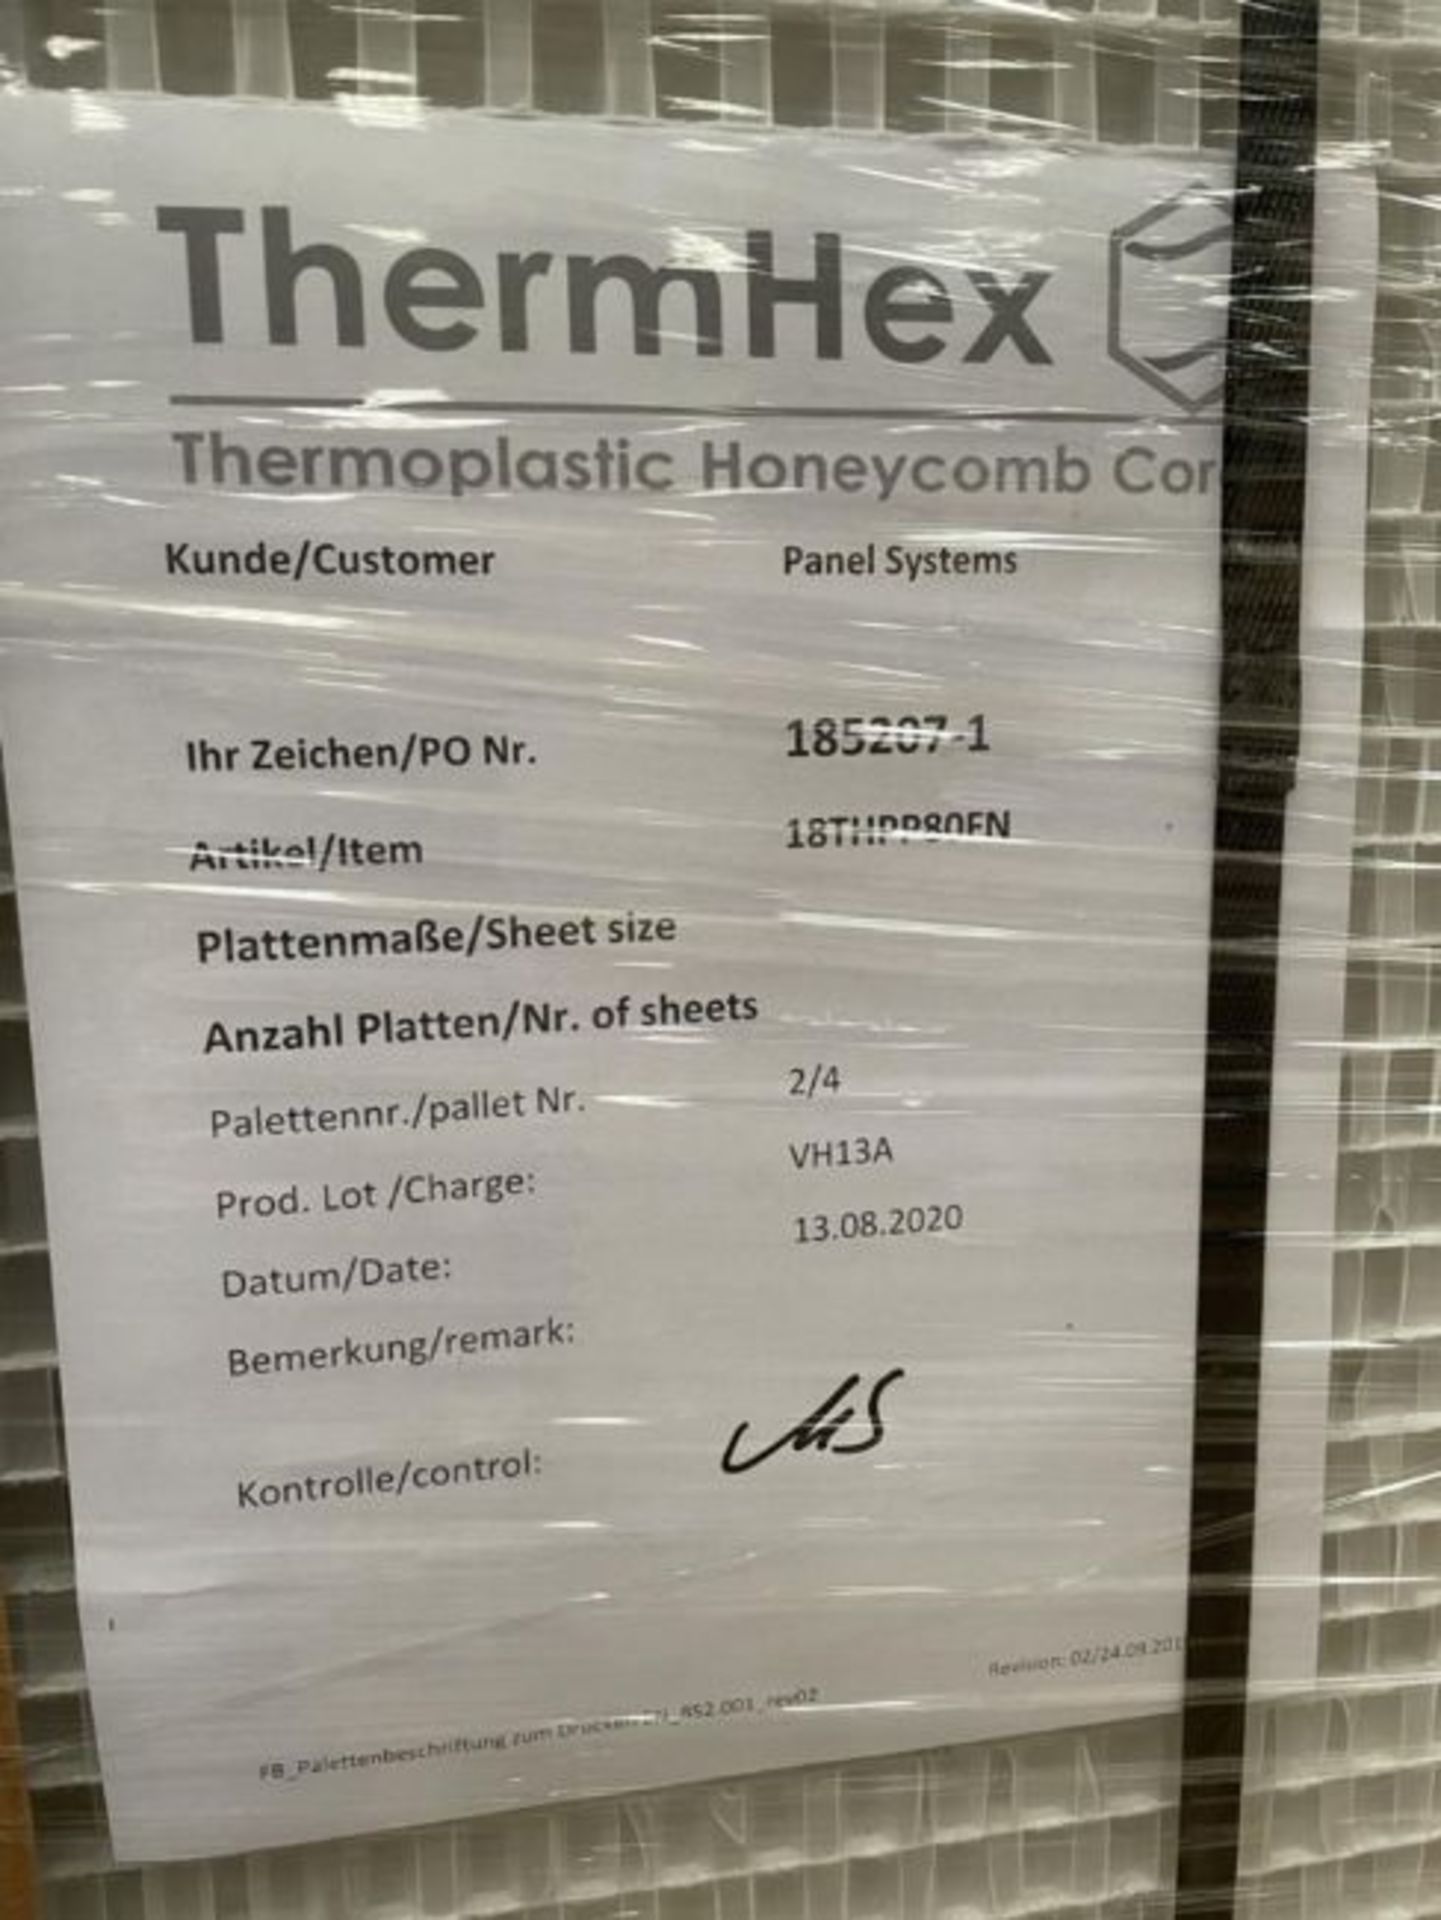 12 x ThermHex Thermoplastic Honeycomb Core Panels - Size 3558 x 1215 x 20mm - New Stock - - Image 9 of 10